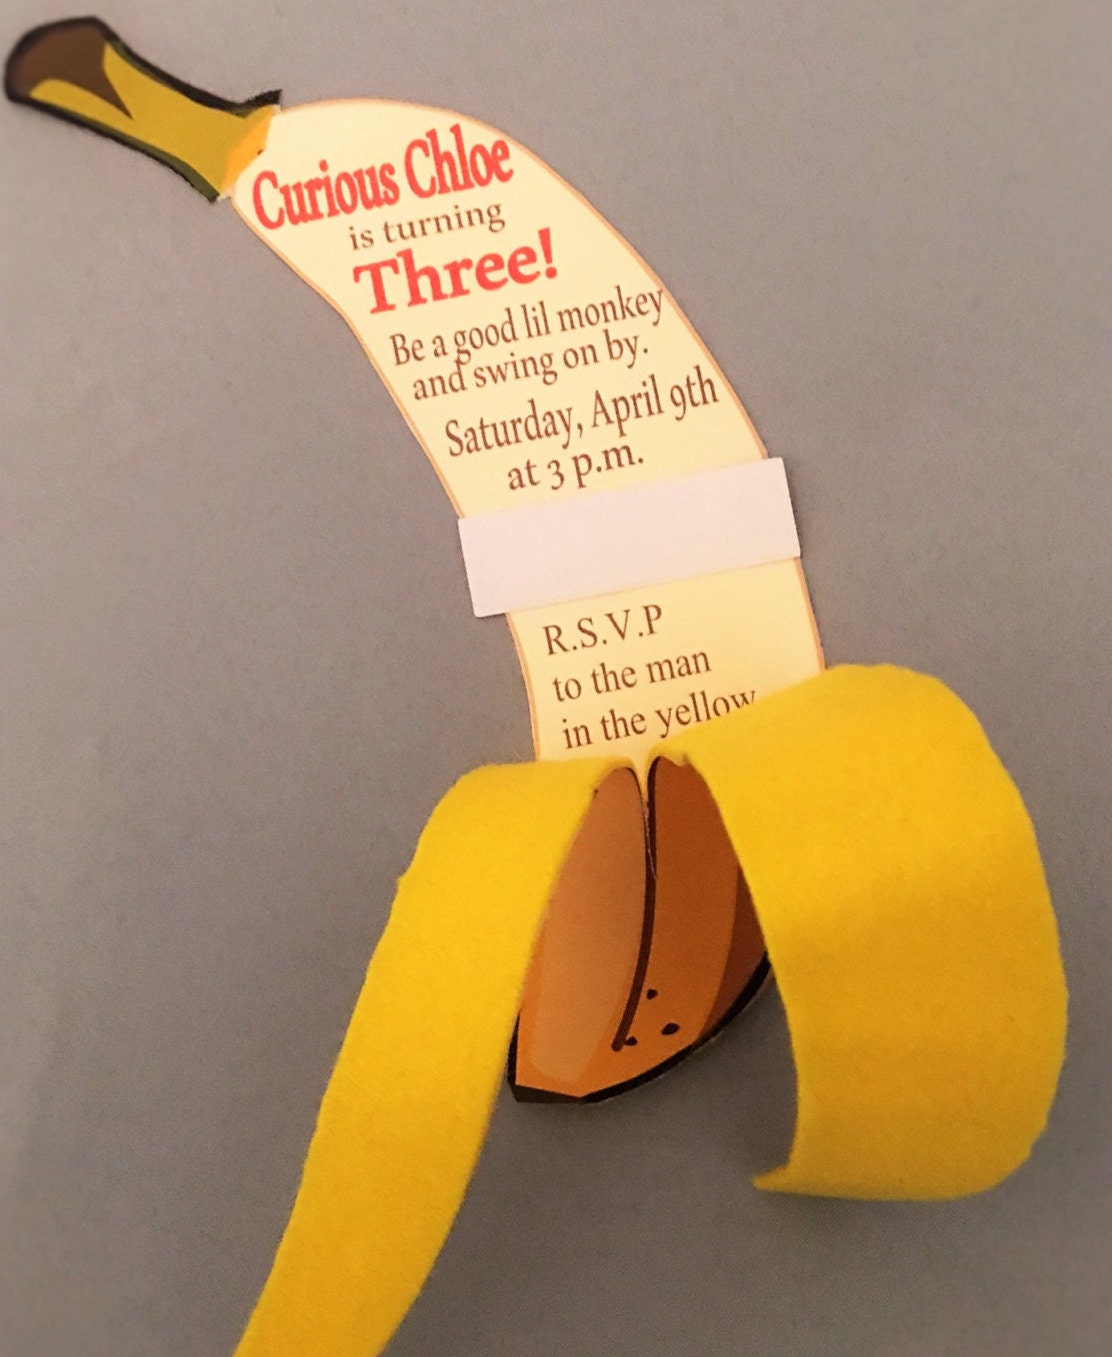 Curious George Invitations/ curious george inspired banana invitations.  Set of 12 invites and envelopes